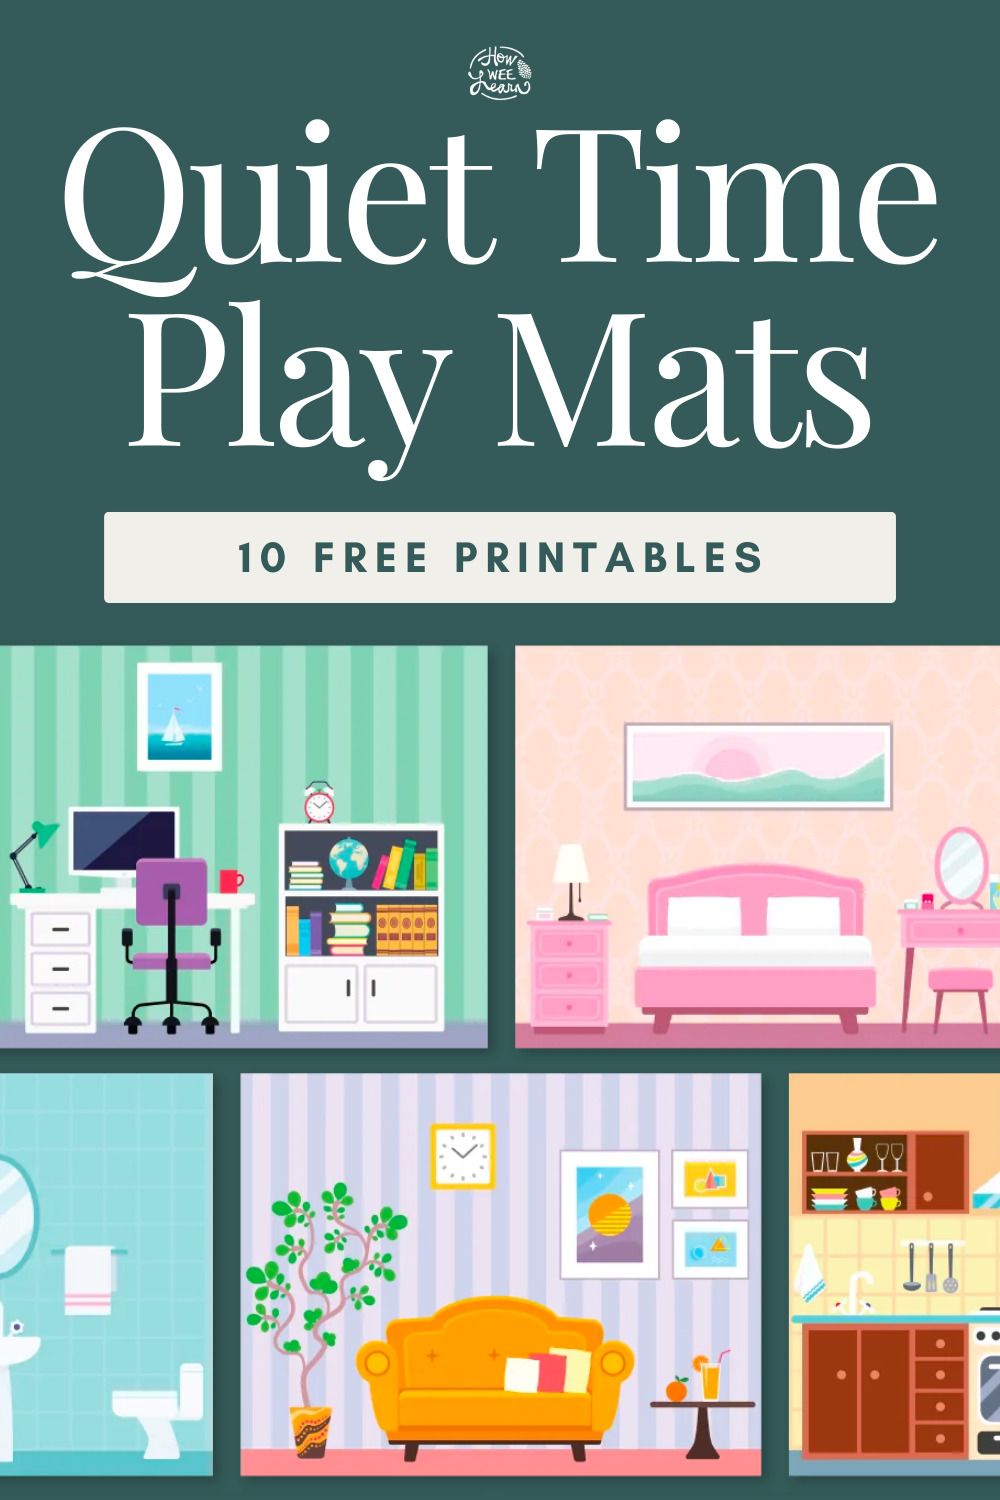 Quiet Time Play Mats 10 Free Printables with pictures of five dollhouse playmats